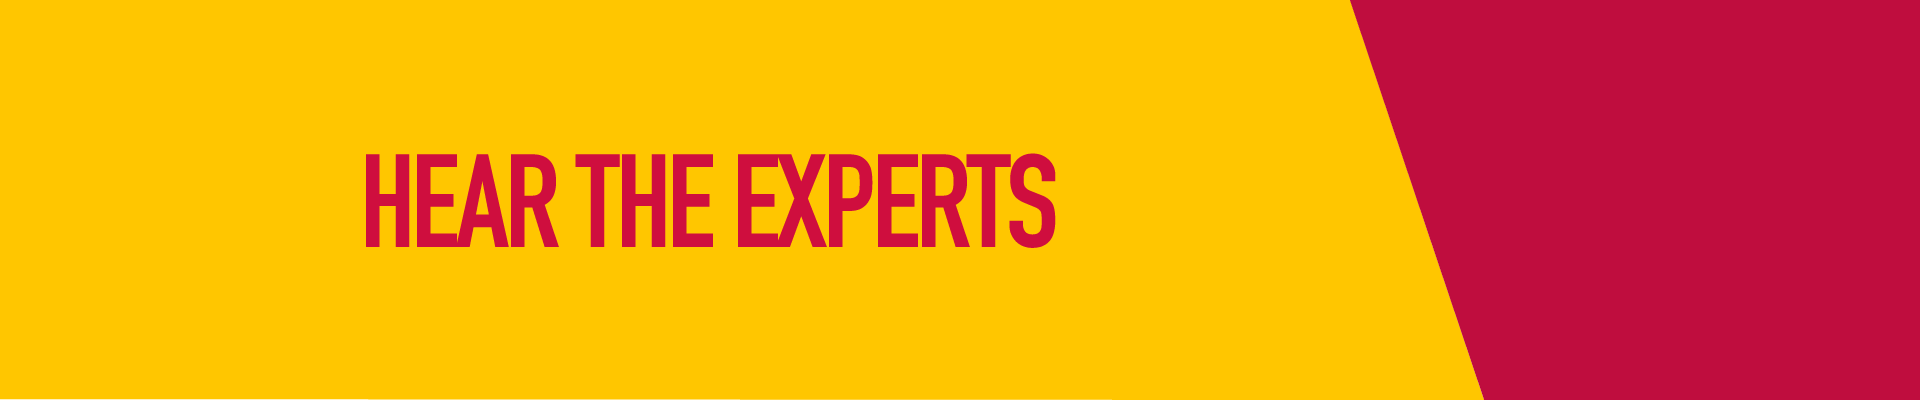 hear-the-experts-banner